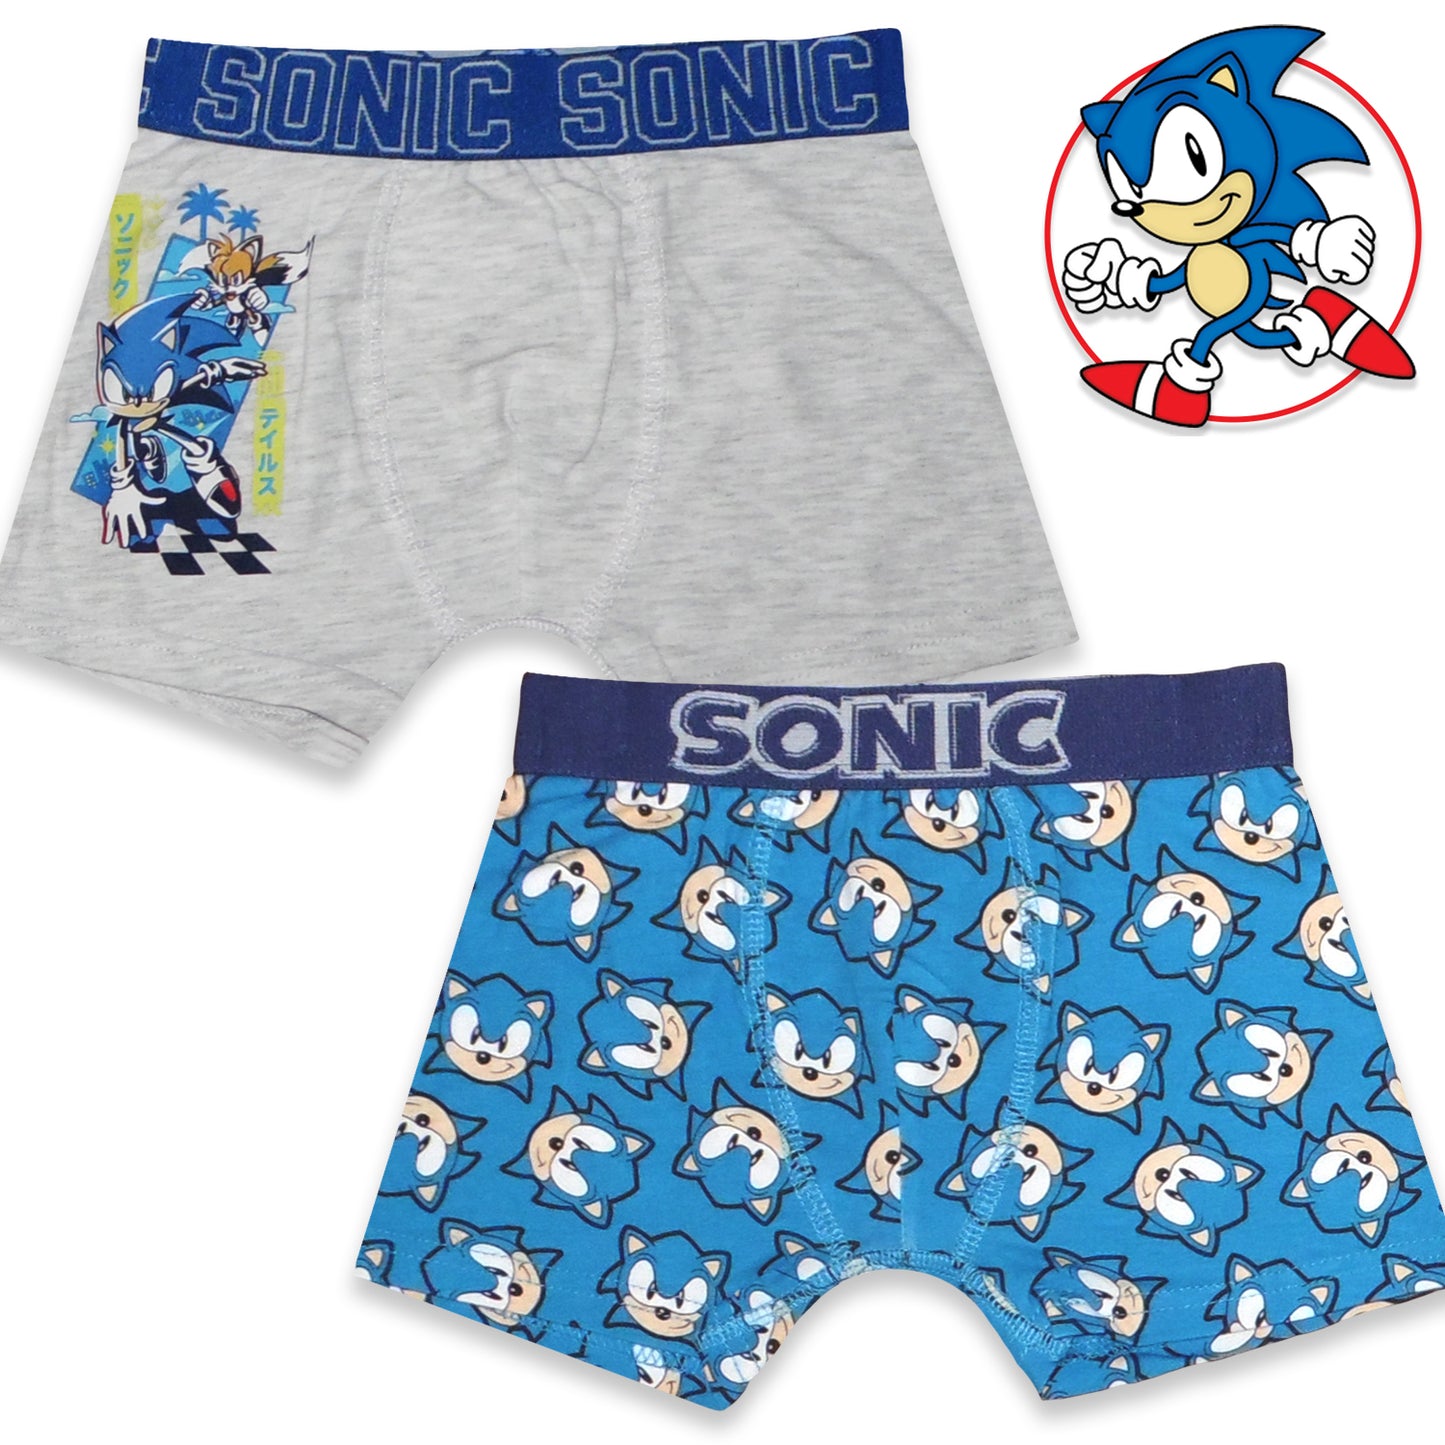 SONIC the Hedgehog Cotton Underwear for Kids, Pack of 2 – Shoppe 'N' Smile